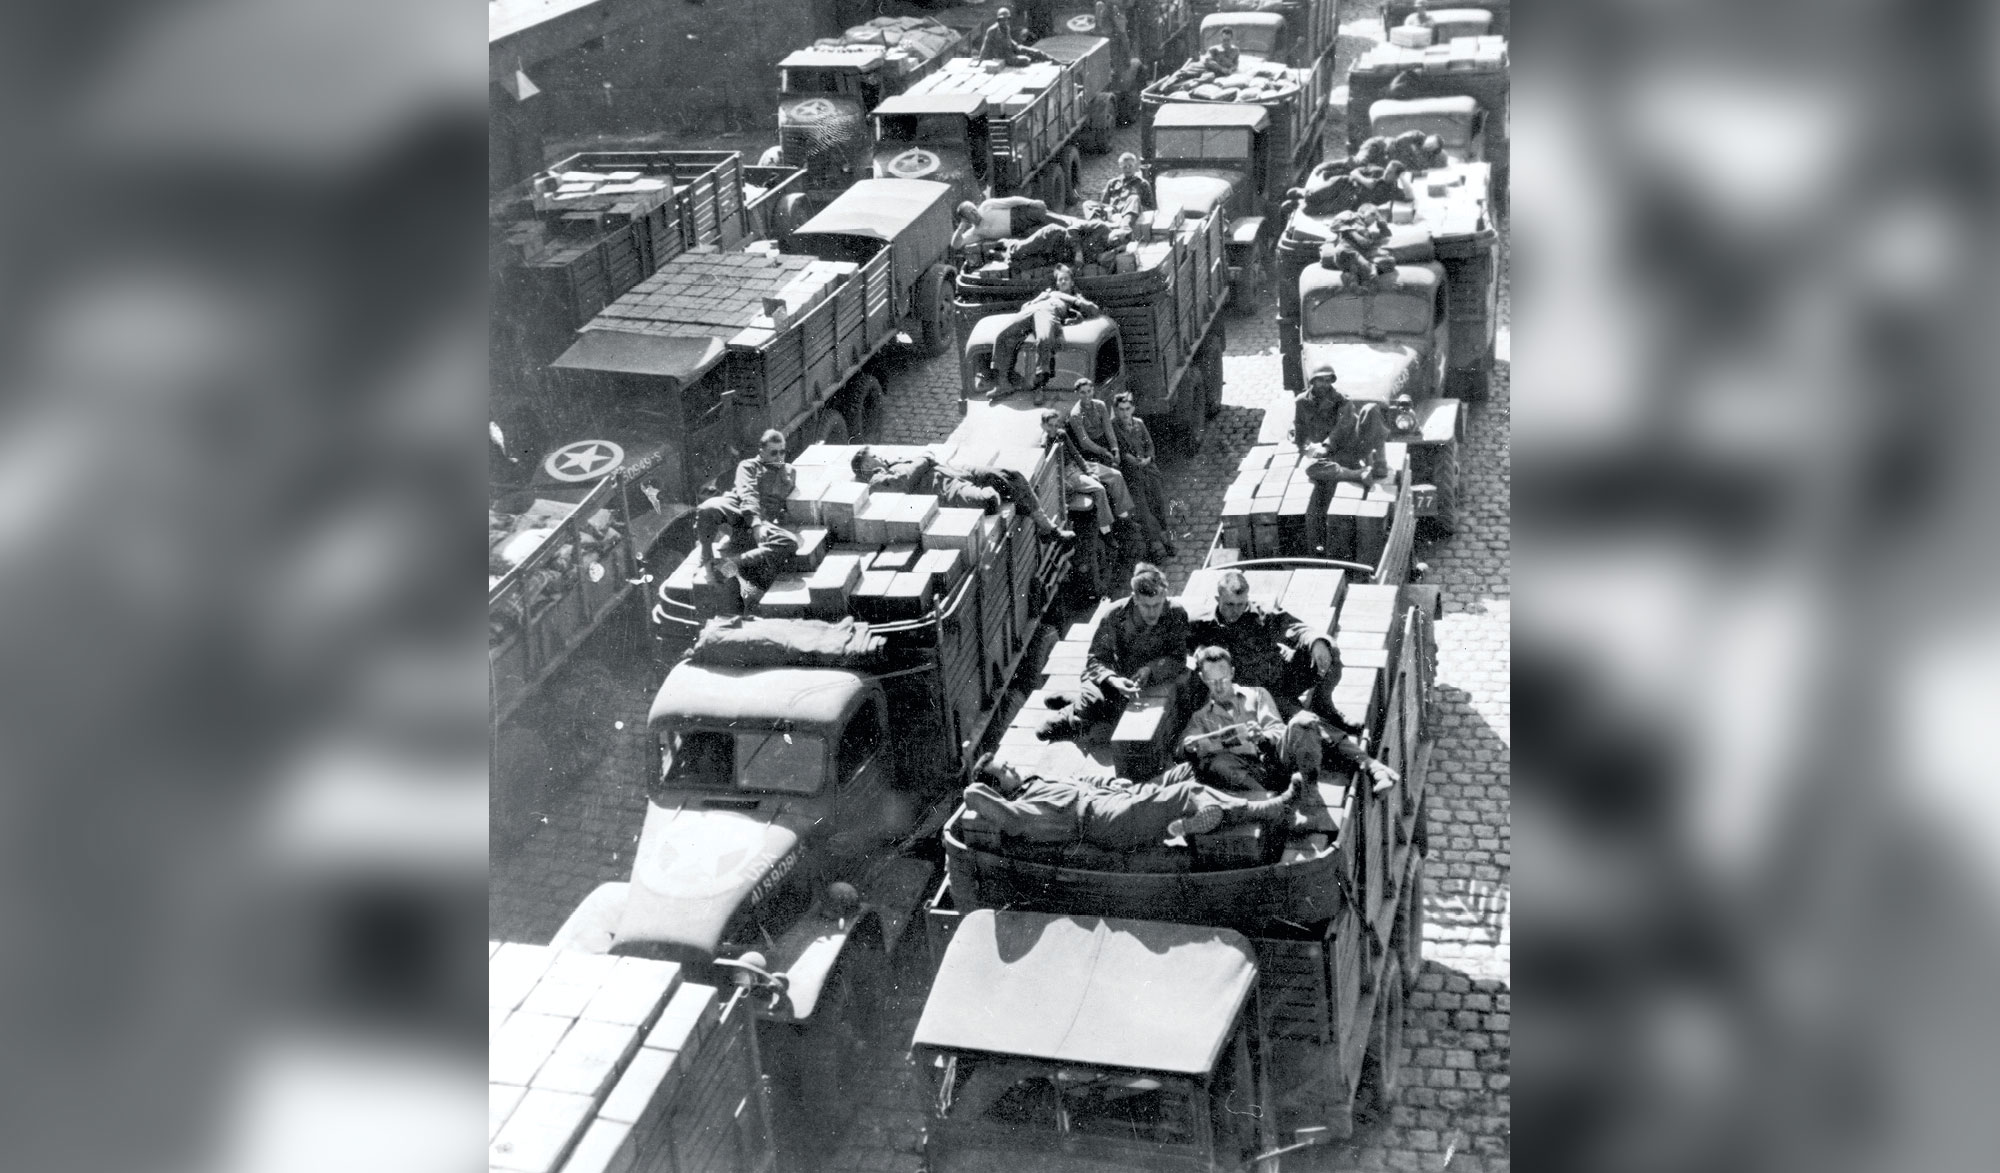 U.S. drivers nap or relax on boxes of ammunition and other equipment 10 October 1944 during the delivery of supplies to a forward area in France. The supply train is one of the Red Ball convoys that constituted an endless chain of trucks operating to and from the front on one-way roads. The highways were marked with Red Ball priority signs and were reserved for urgent supplies. (Photo courtesy of the U.S. Army)